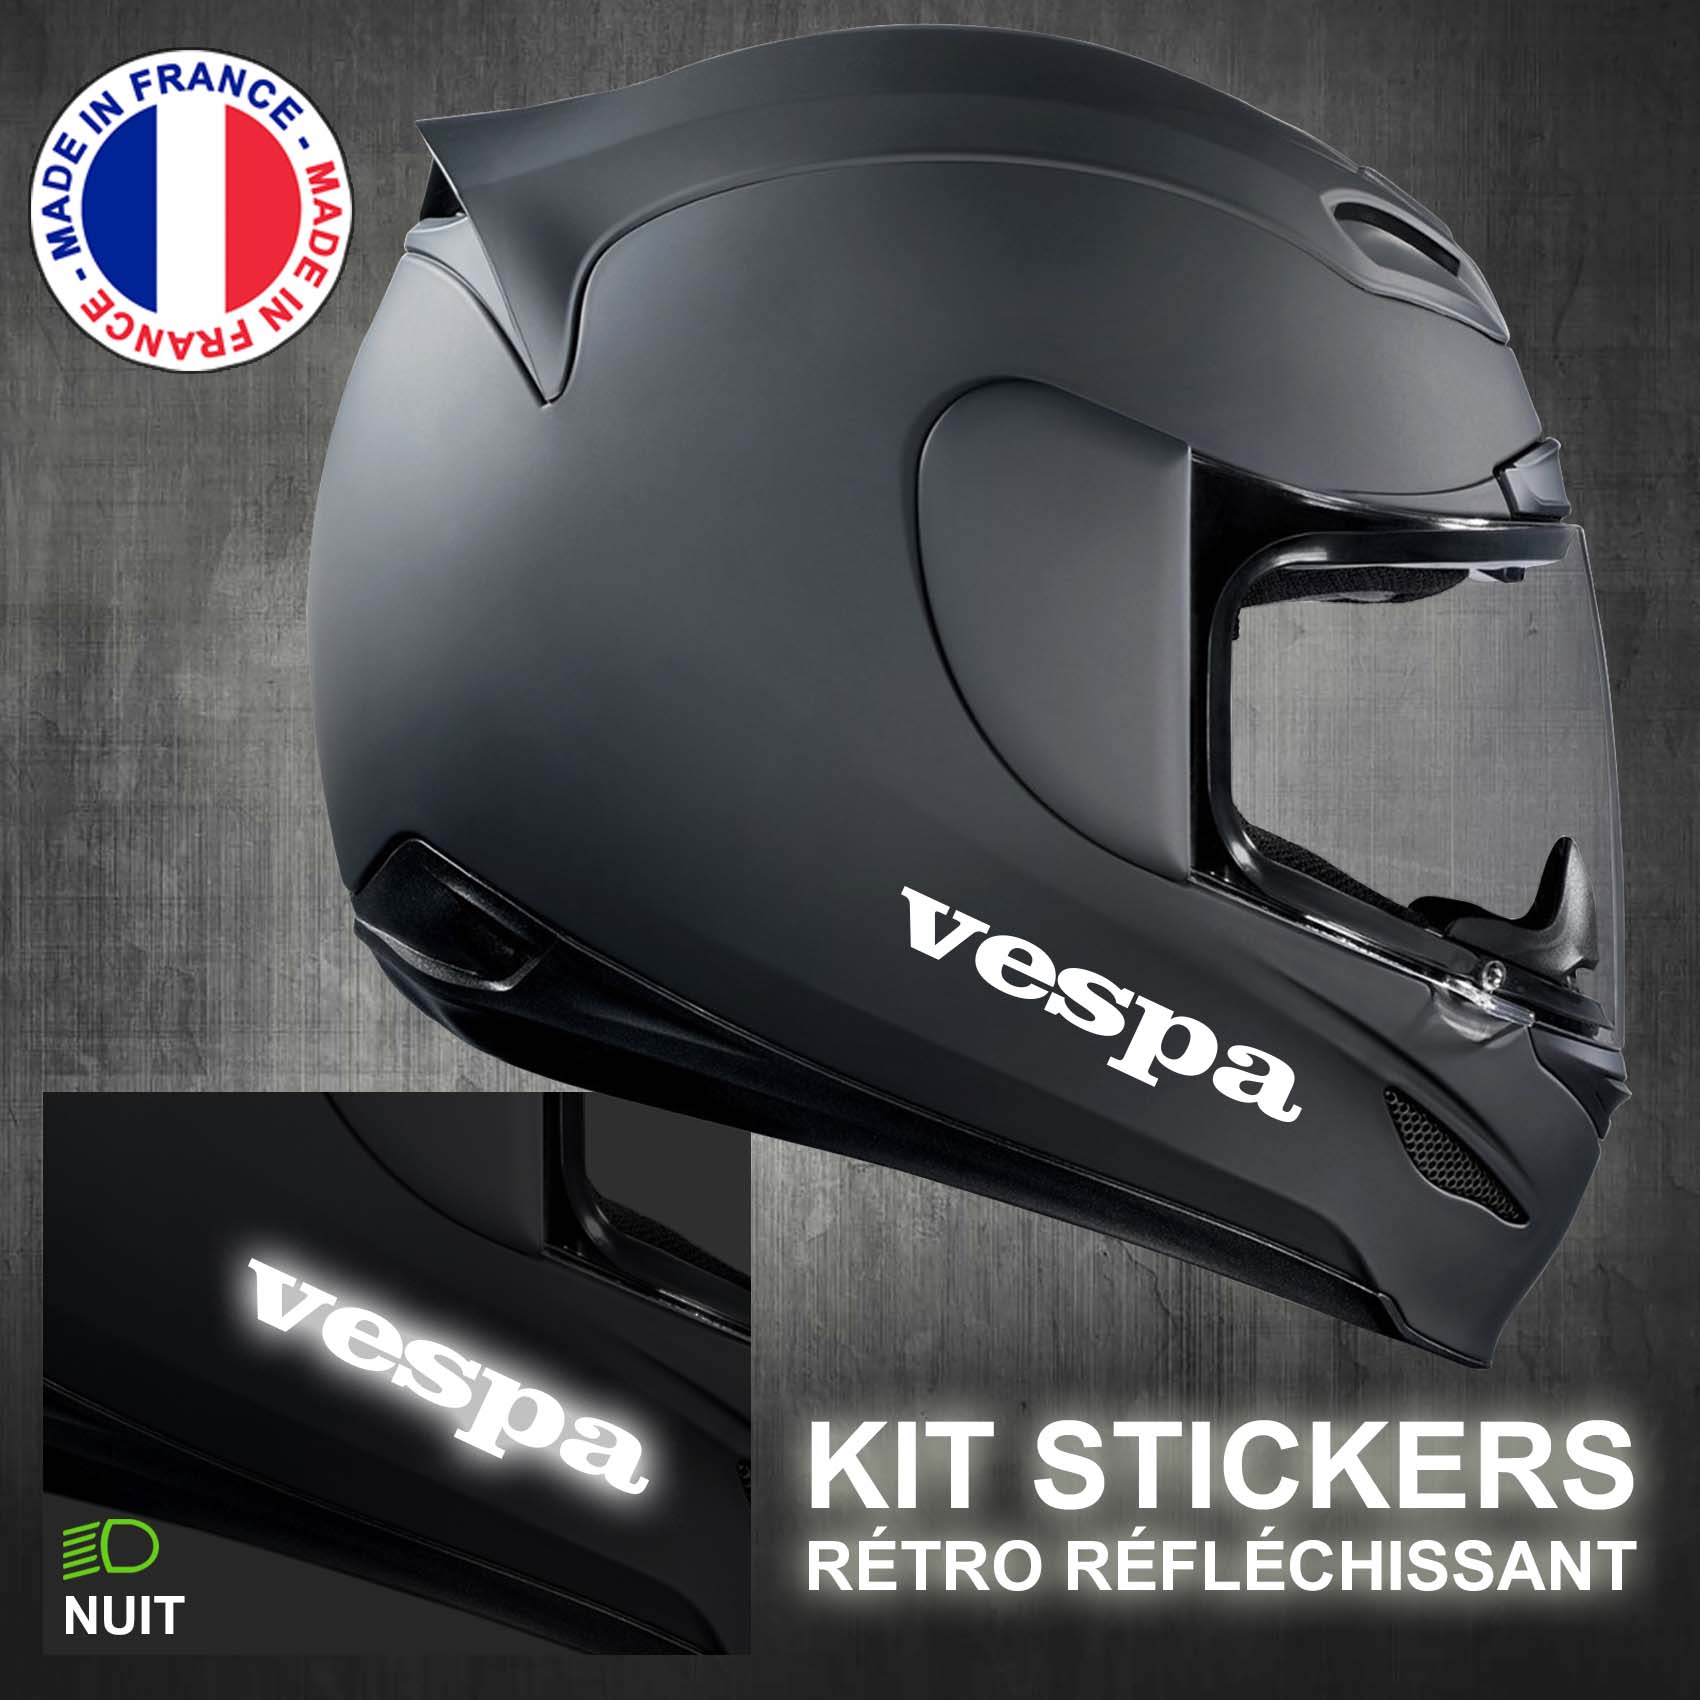 stickers-casque-moto-vespa-ref1-retro-reflechissant-autocollant-noir-moto-velo-tuning-racing-route-sticker-casques-adhesif-scooter-nuit-securite-decals-personnalise-personnalisable-min